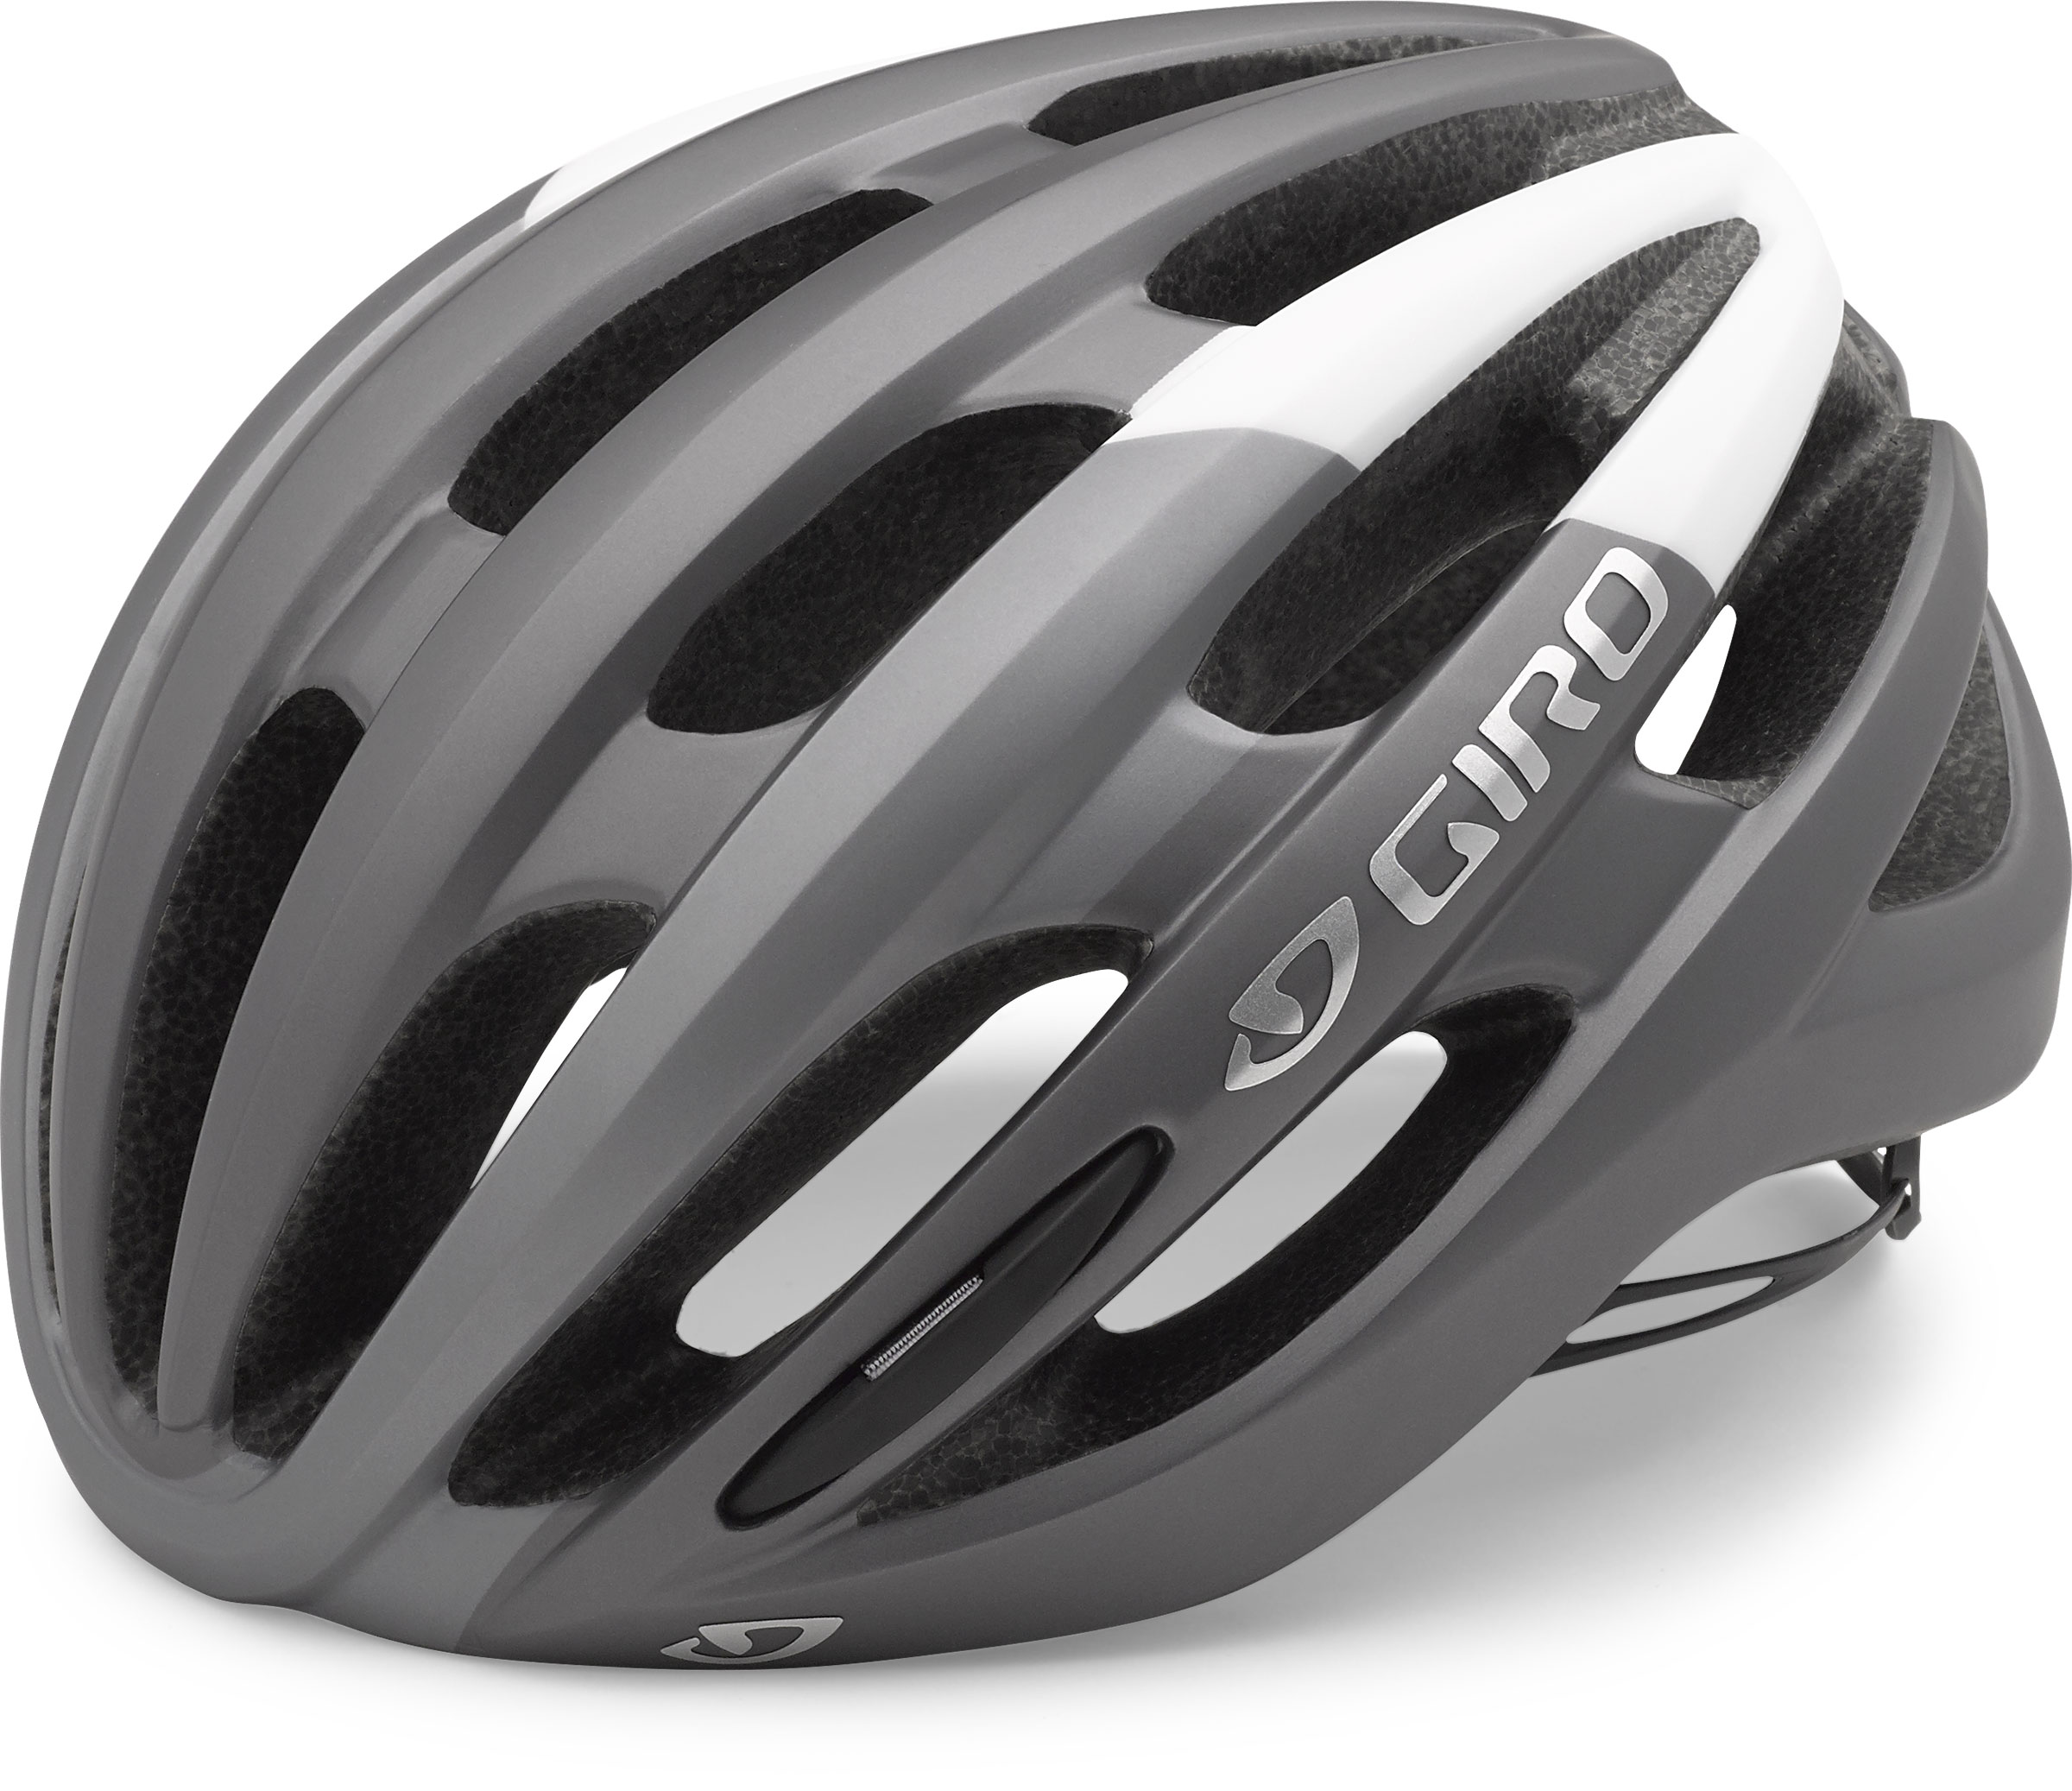 Giro Foray Road Cycling Helmet Matte White/Silver Large 768686542381 